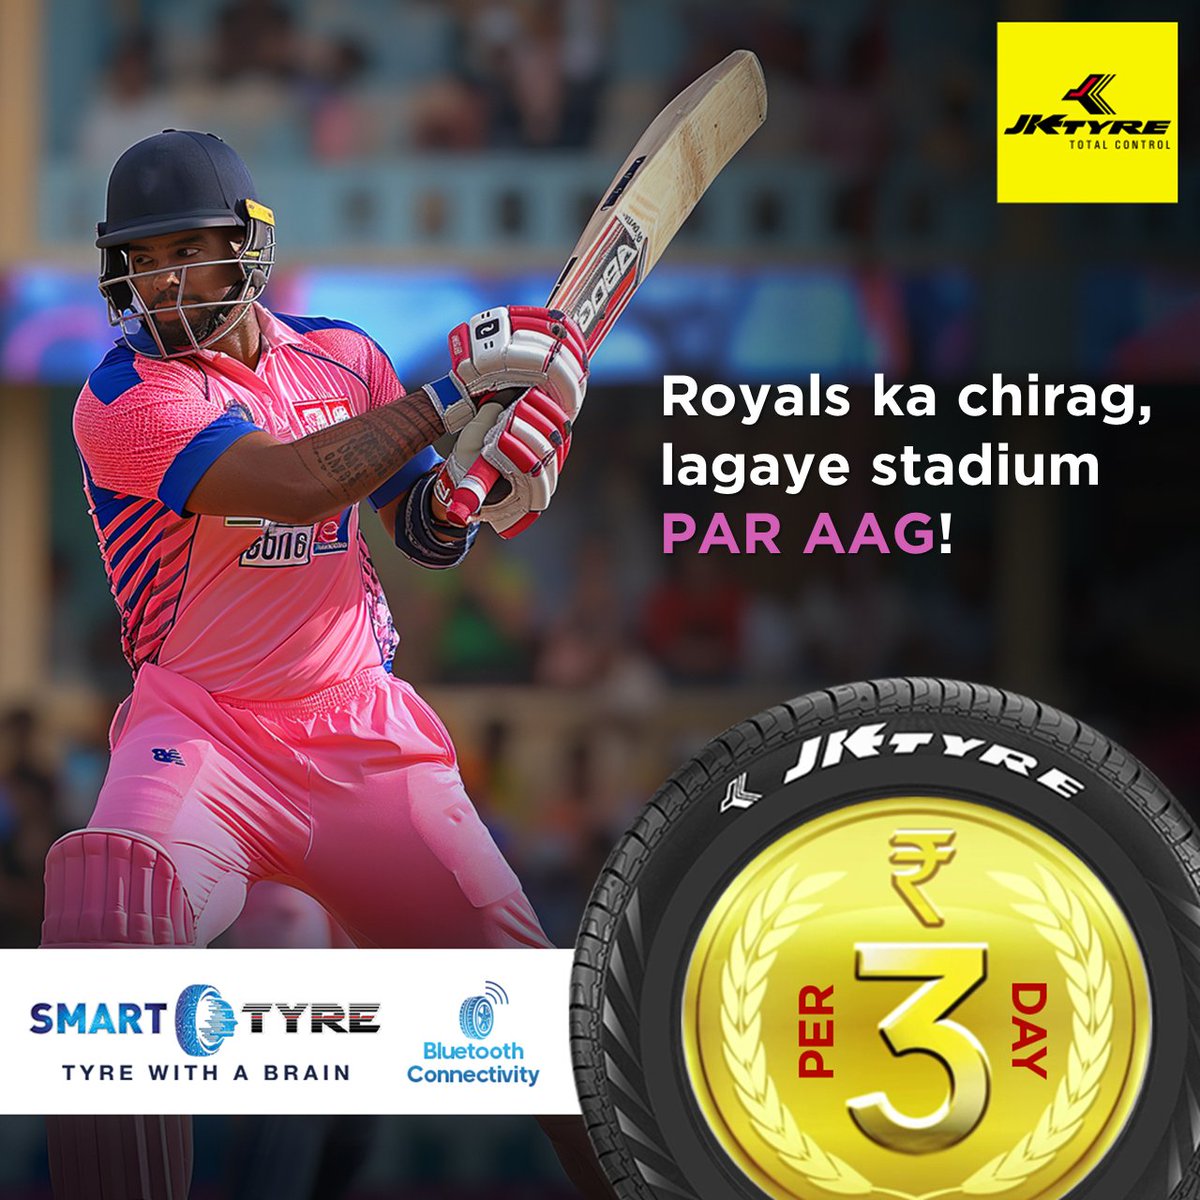 A cool, calm and composed half-century just like a driver on #TyreWithABrain Check out #SmartTyre from JK Tyre at ₹3/day to connect via Bluetooth and get tyre health updates in real-time. #JKTyre #IndianT20League #Rajasthan #Hyderabad